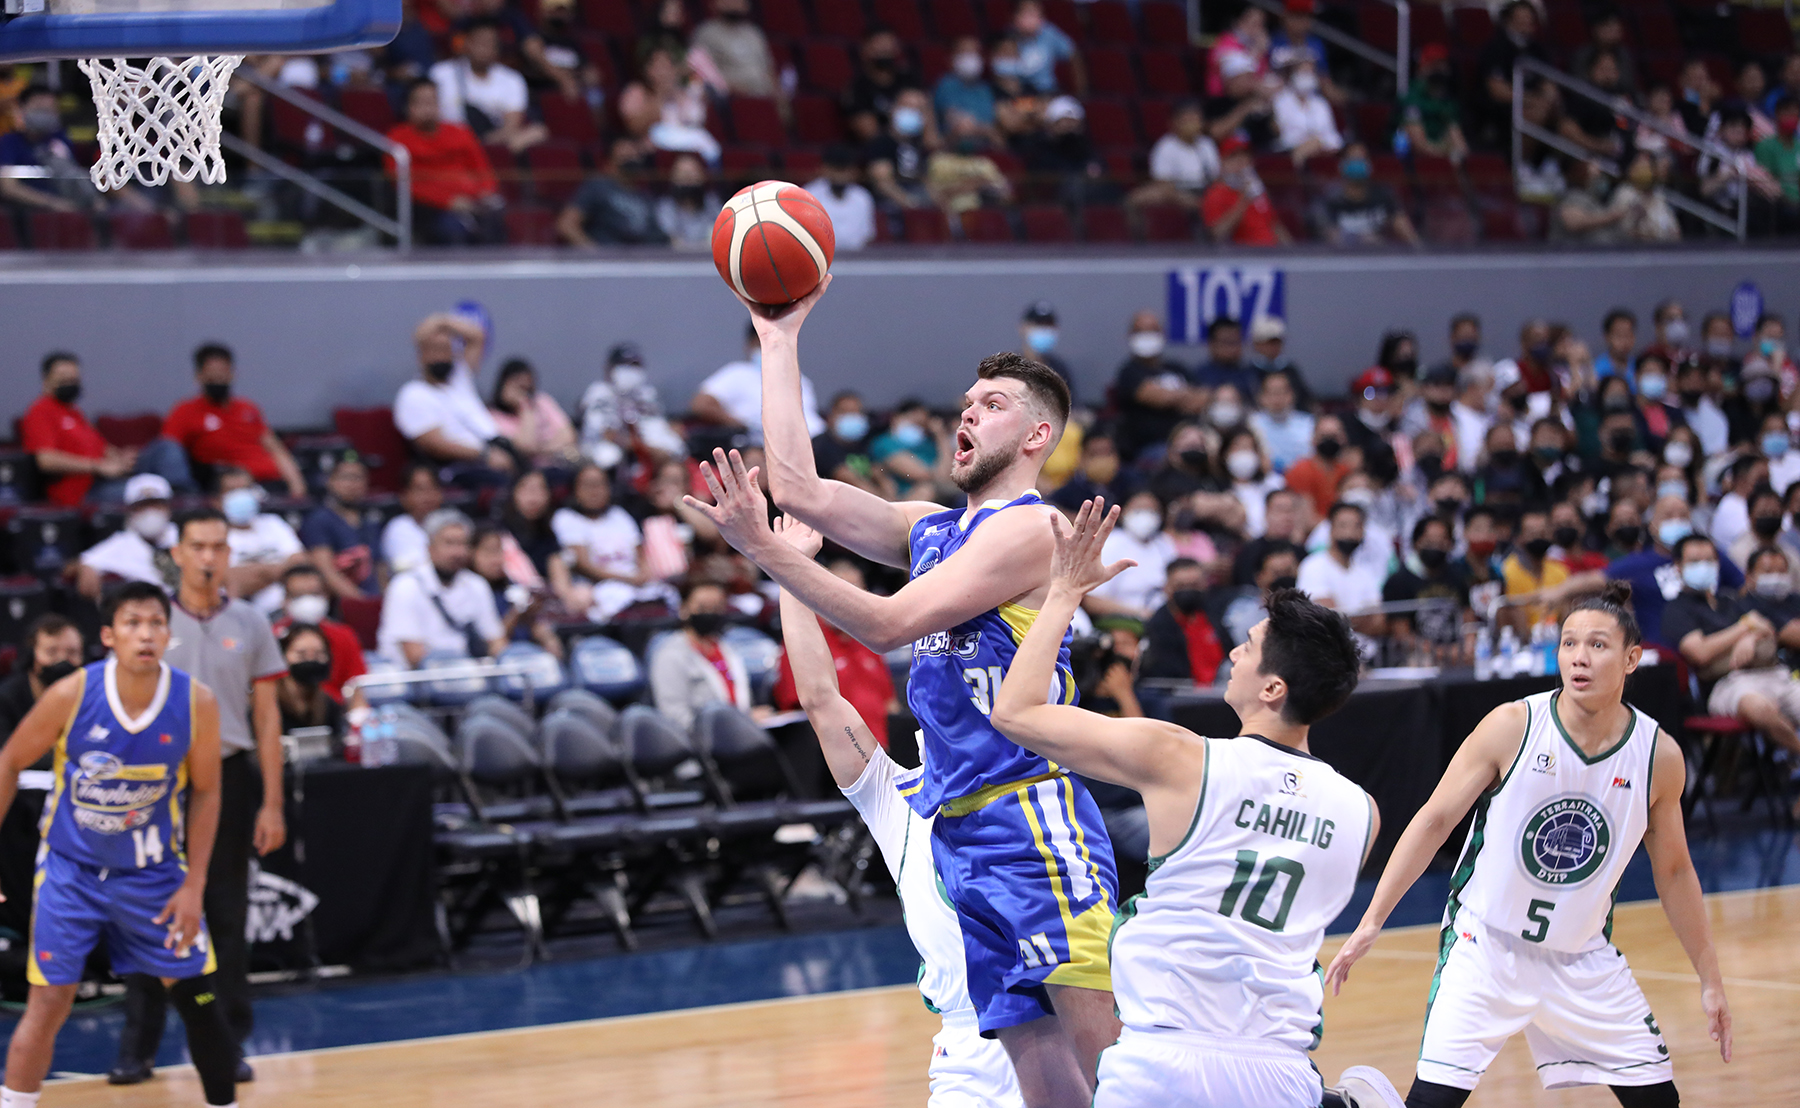 Magnolia’s Nick Rakocevic rises above the Terrafirma defense on the way to a game-high 45 points. —PBA IMAGES